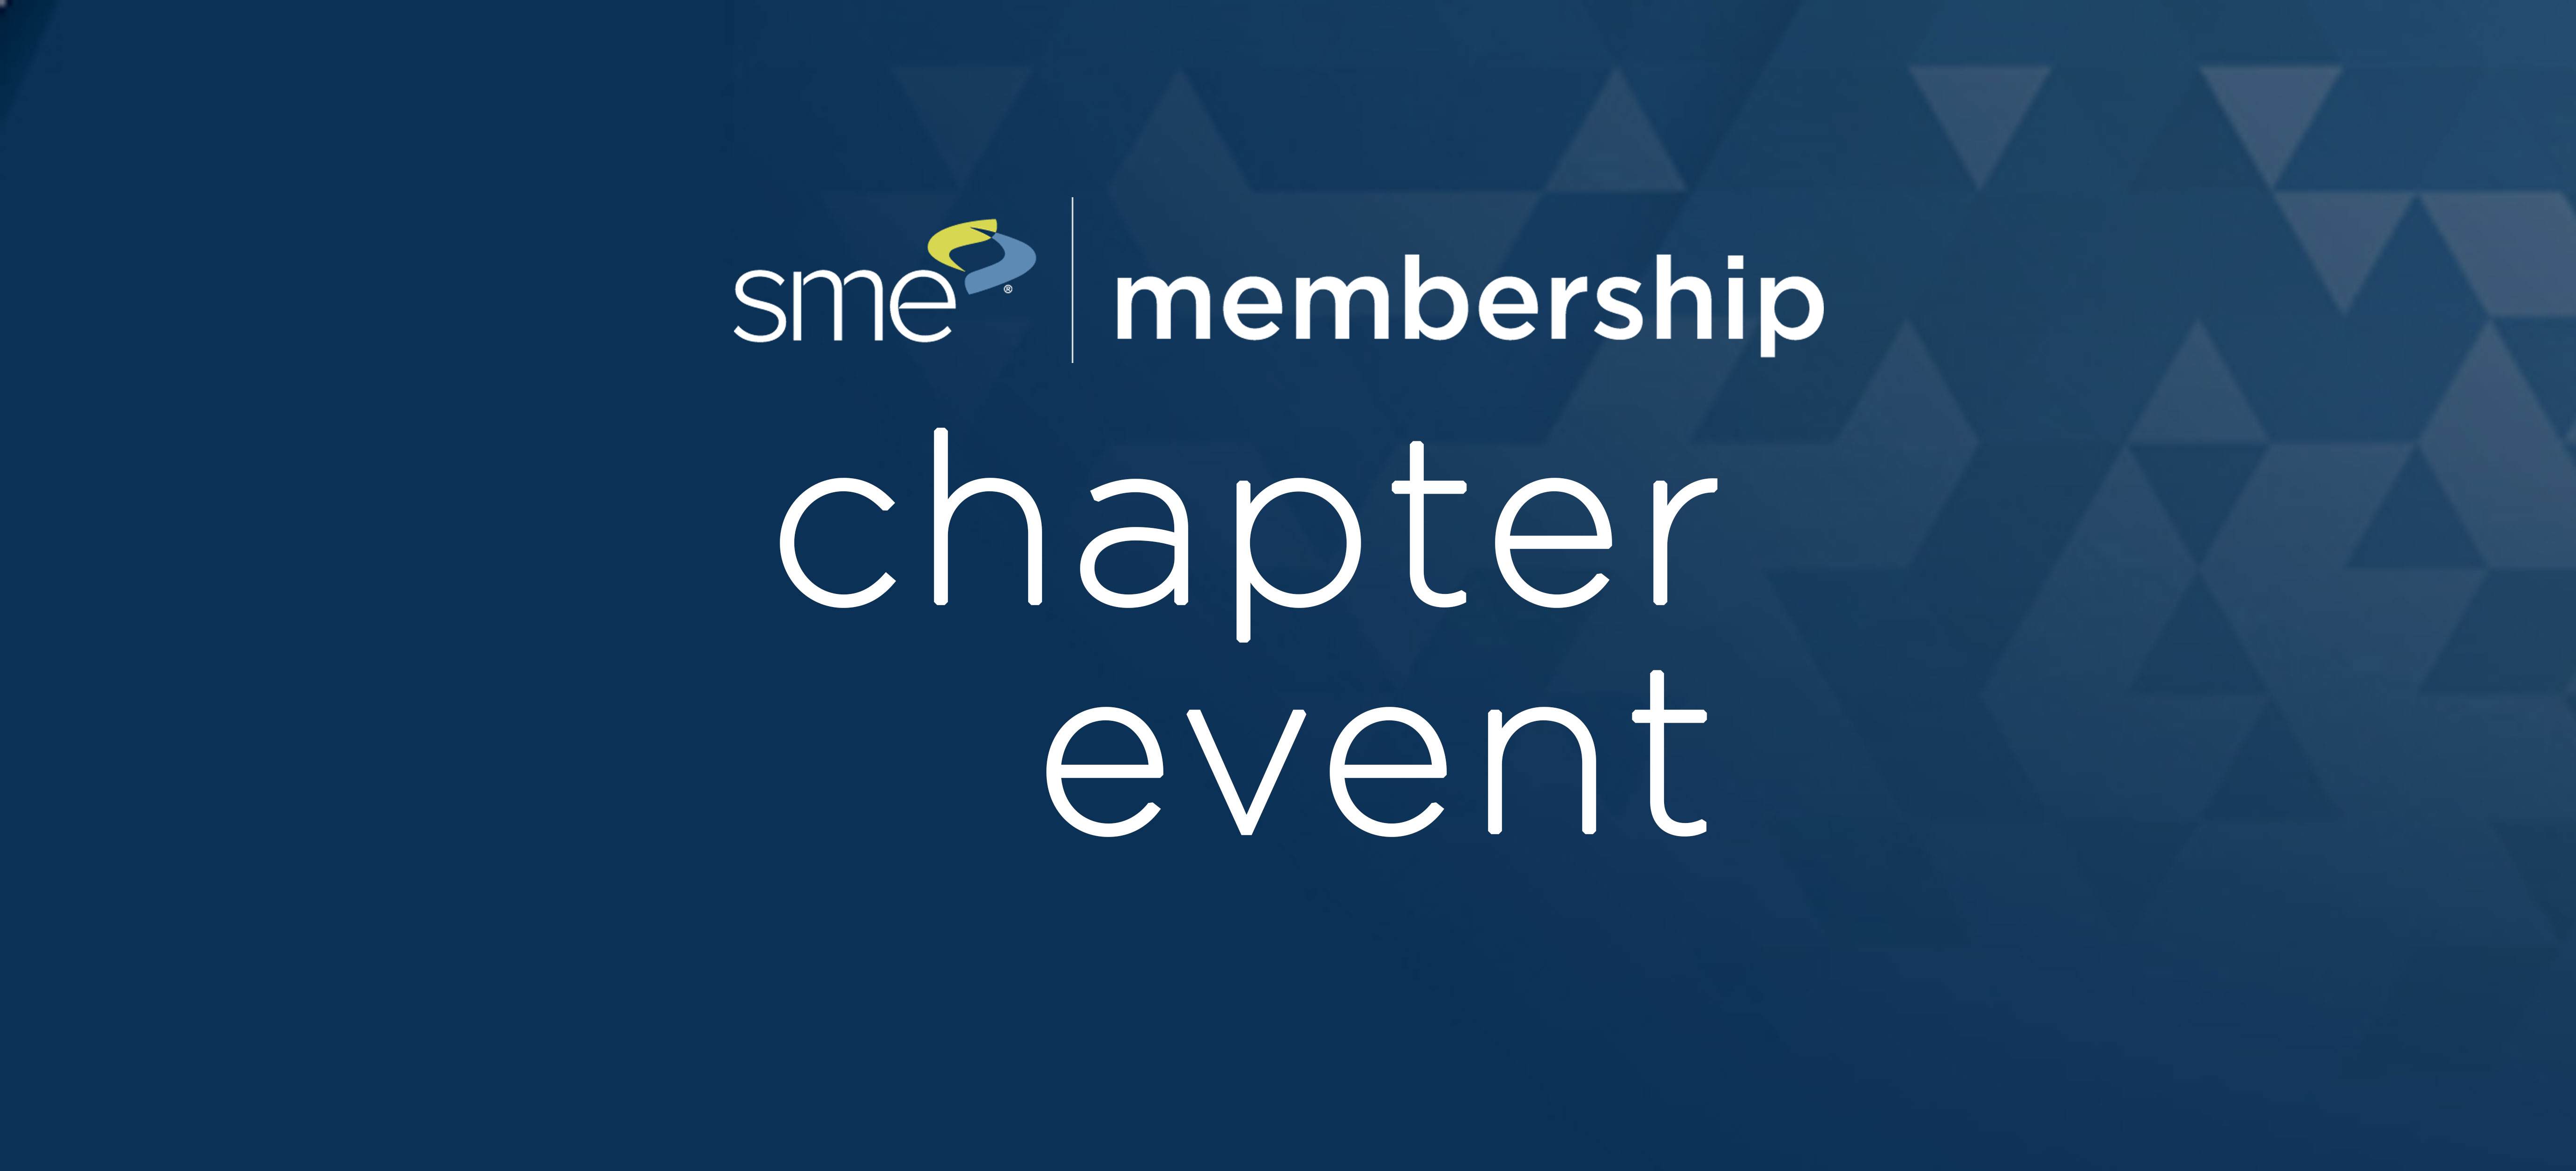 SME Chapter 069  2021 Installation  Dinner & Holiday Social Event on December 14th at 6:00 p.m- RSVP Required by December 6th 1168